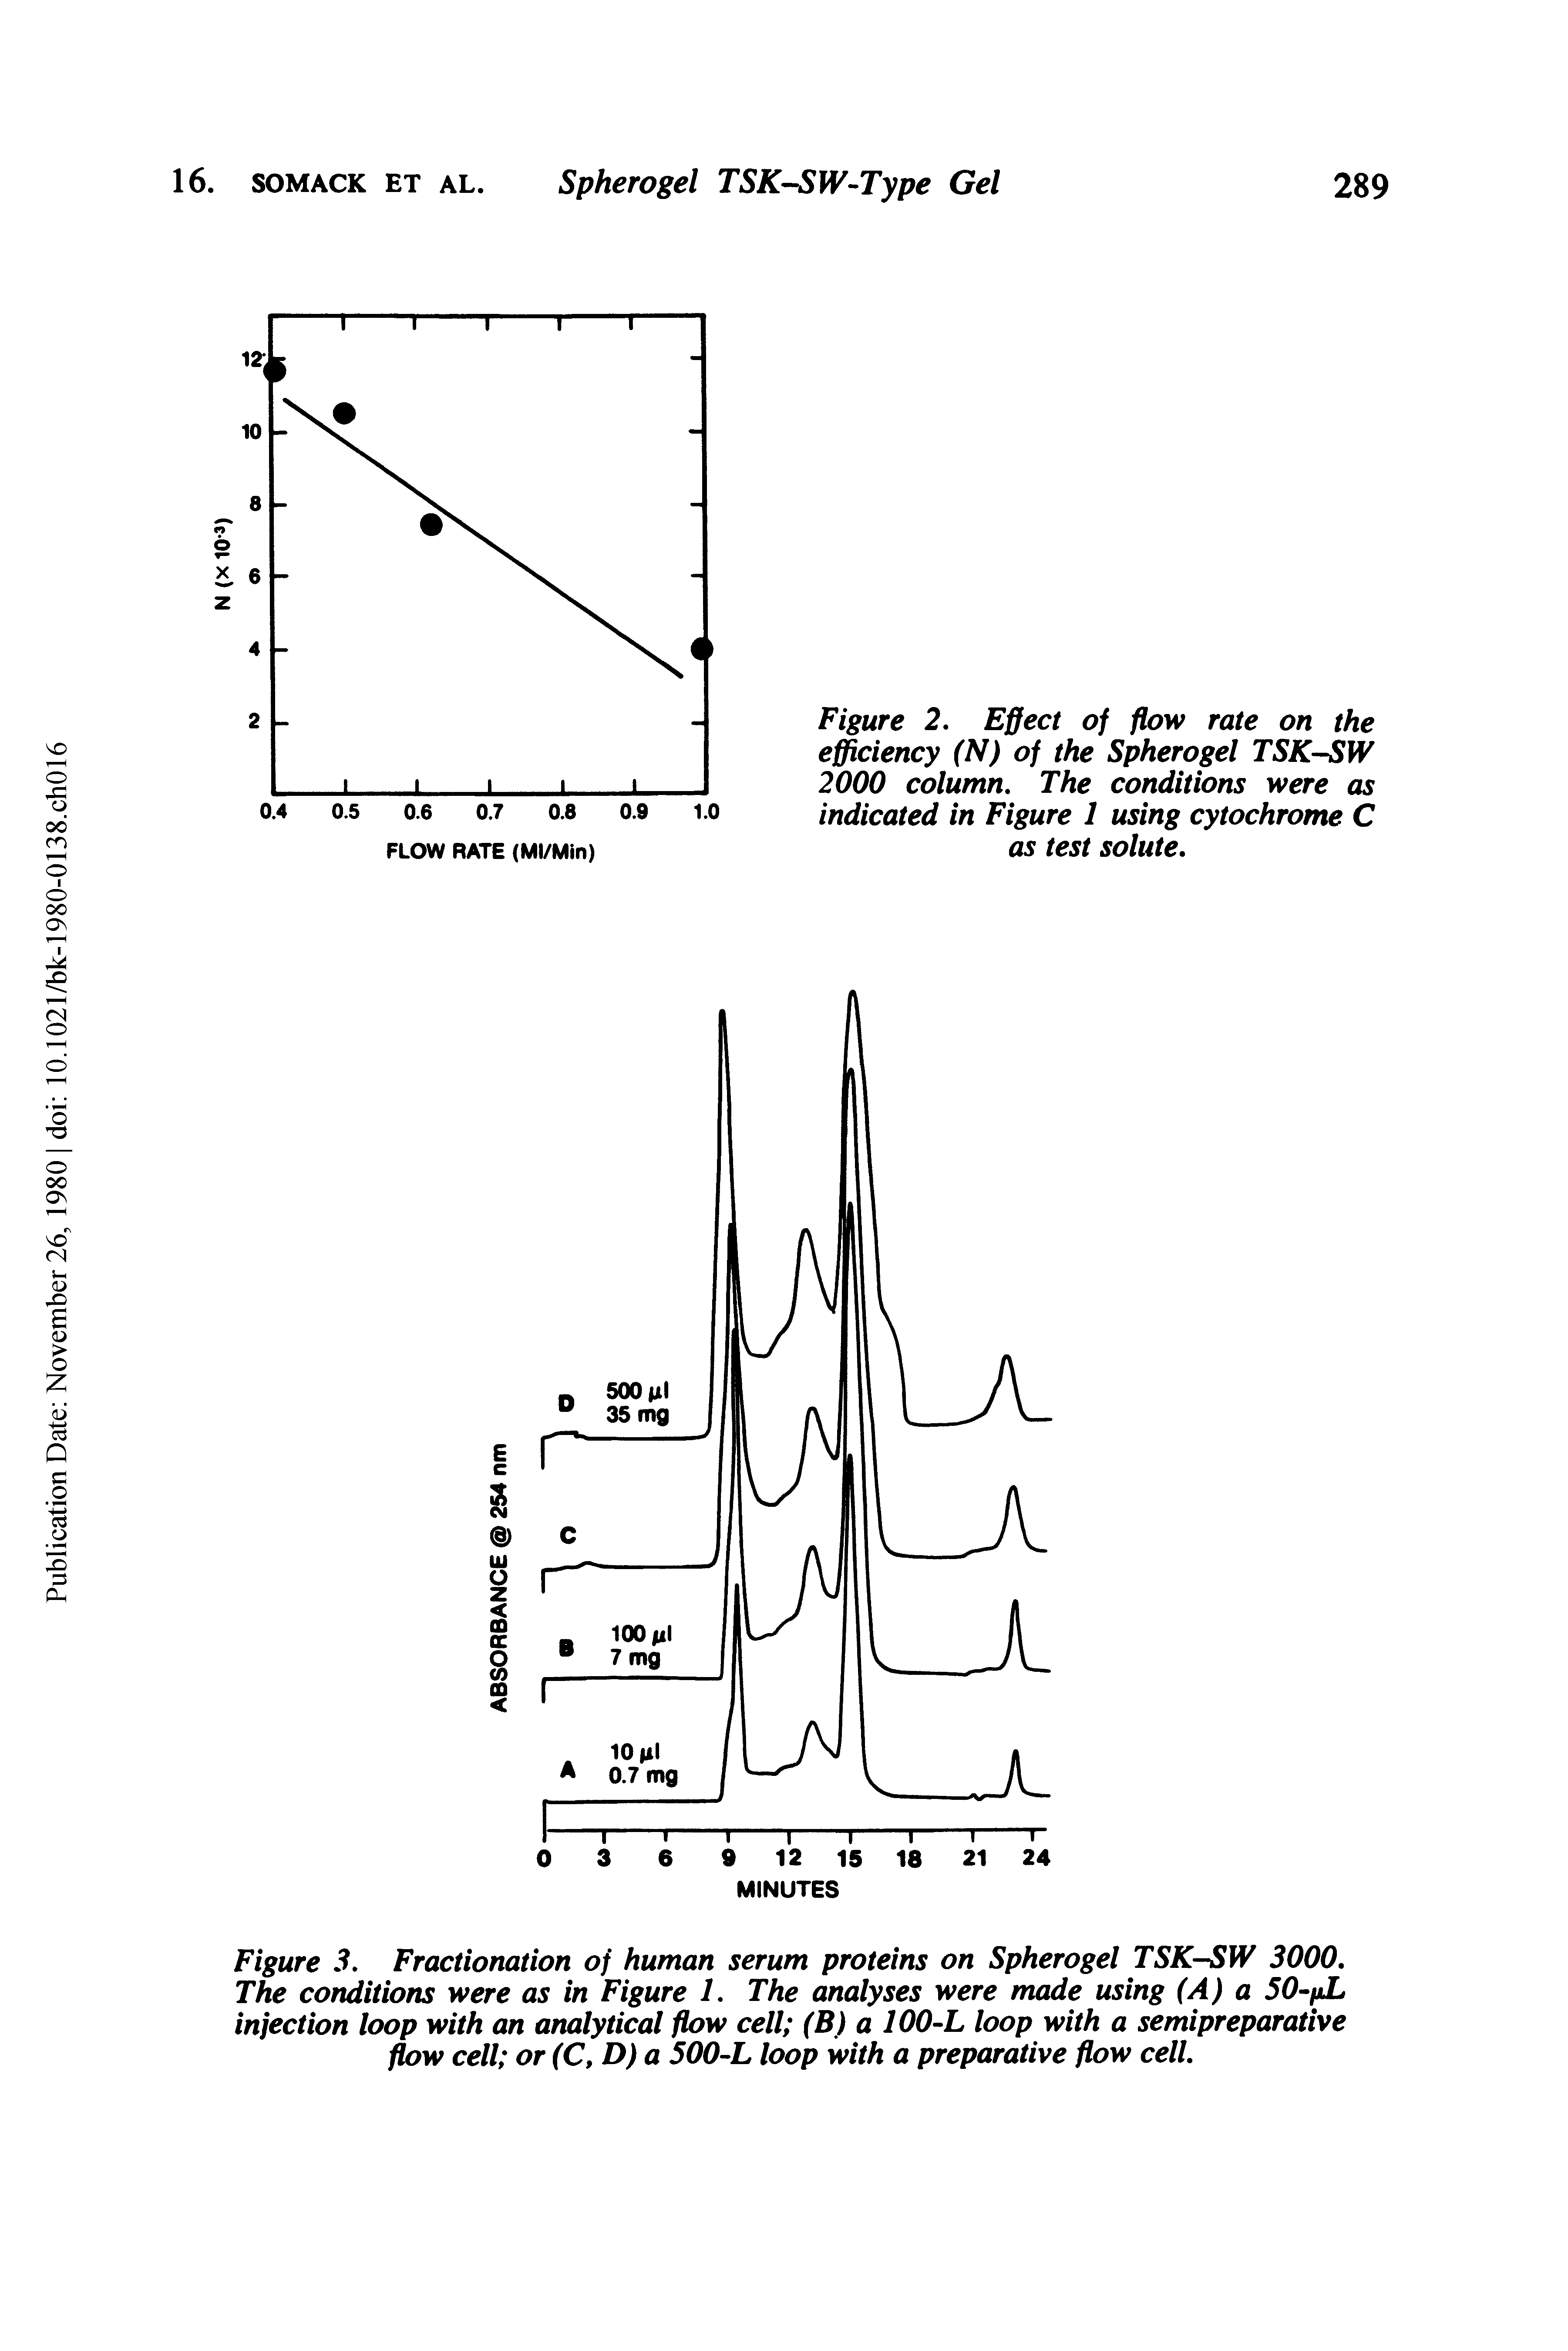 Figure 2. Effect of flow rate on the efficiency (N) of the Spherogel TSK-SW 2000 column. The conditions were as indicated in Figure 1 using cytochrome C as test solute.